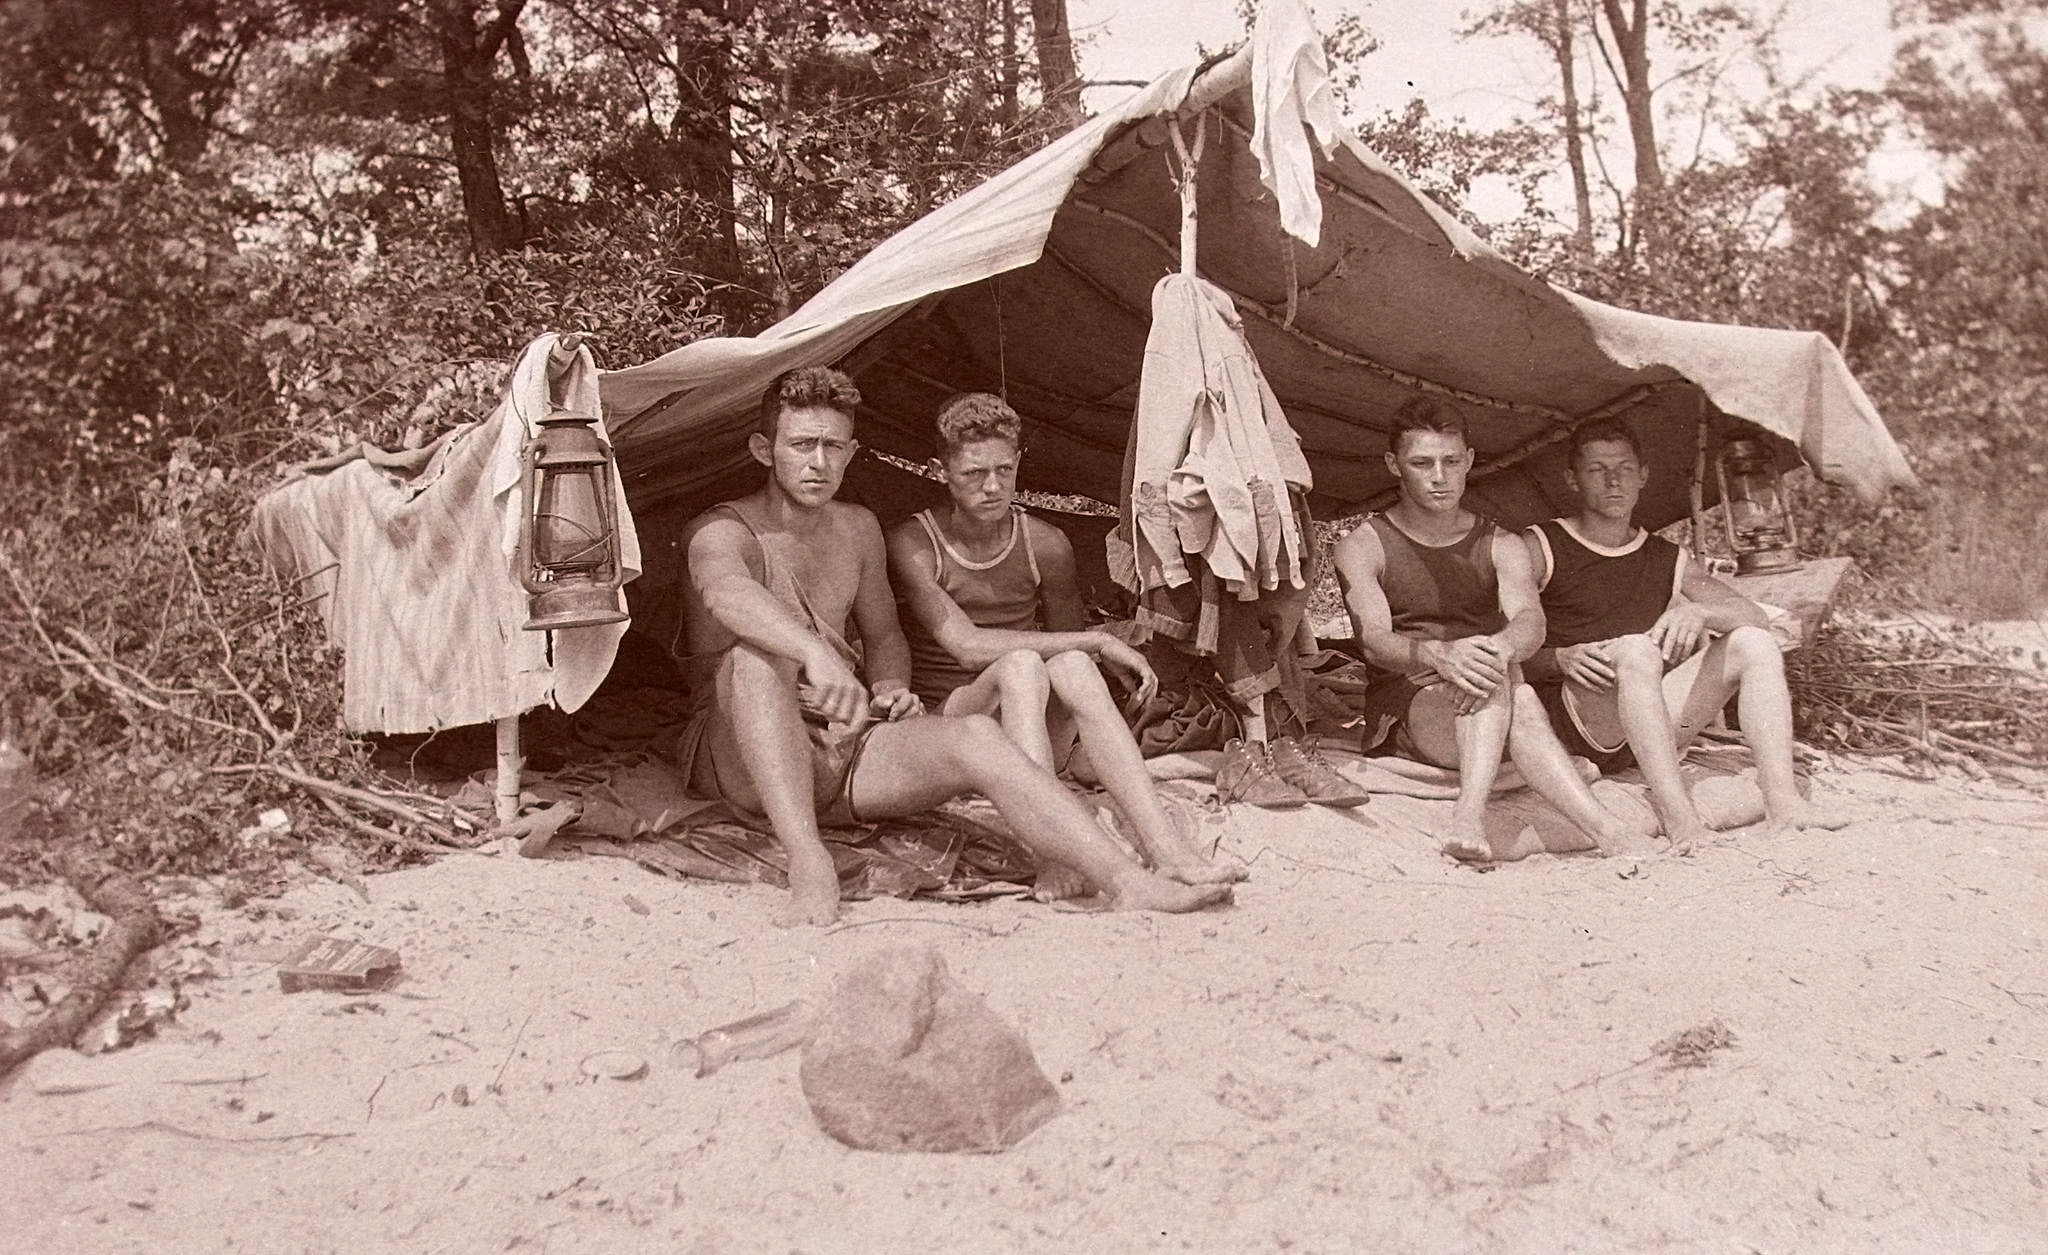 All I can really tell you about this is that it was taken on a beach somewhere in Maine. My grandfather Harold L. Winter is sitting on the far left. This was in a box of negatives of his and I believe it's from 1920, which would have made him about 18, as he was born in 1902. He grew up in Livermore Falls so it may be in that area somewhere or possibly near Orono where he went to the University of Maine. I will share more of his photos in time. View full size.